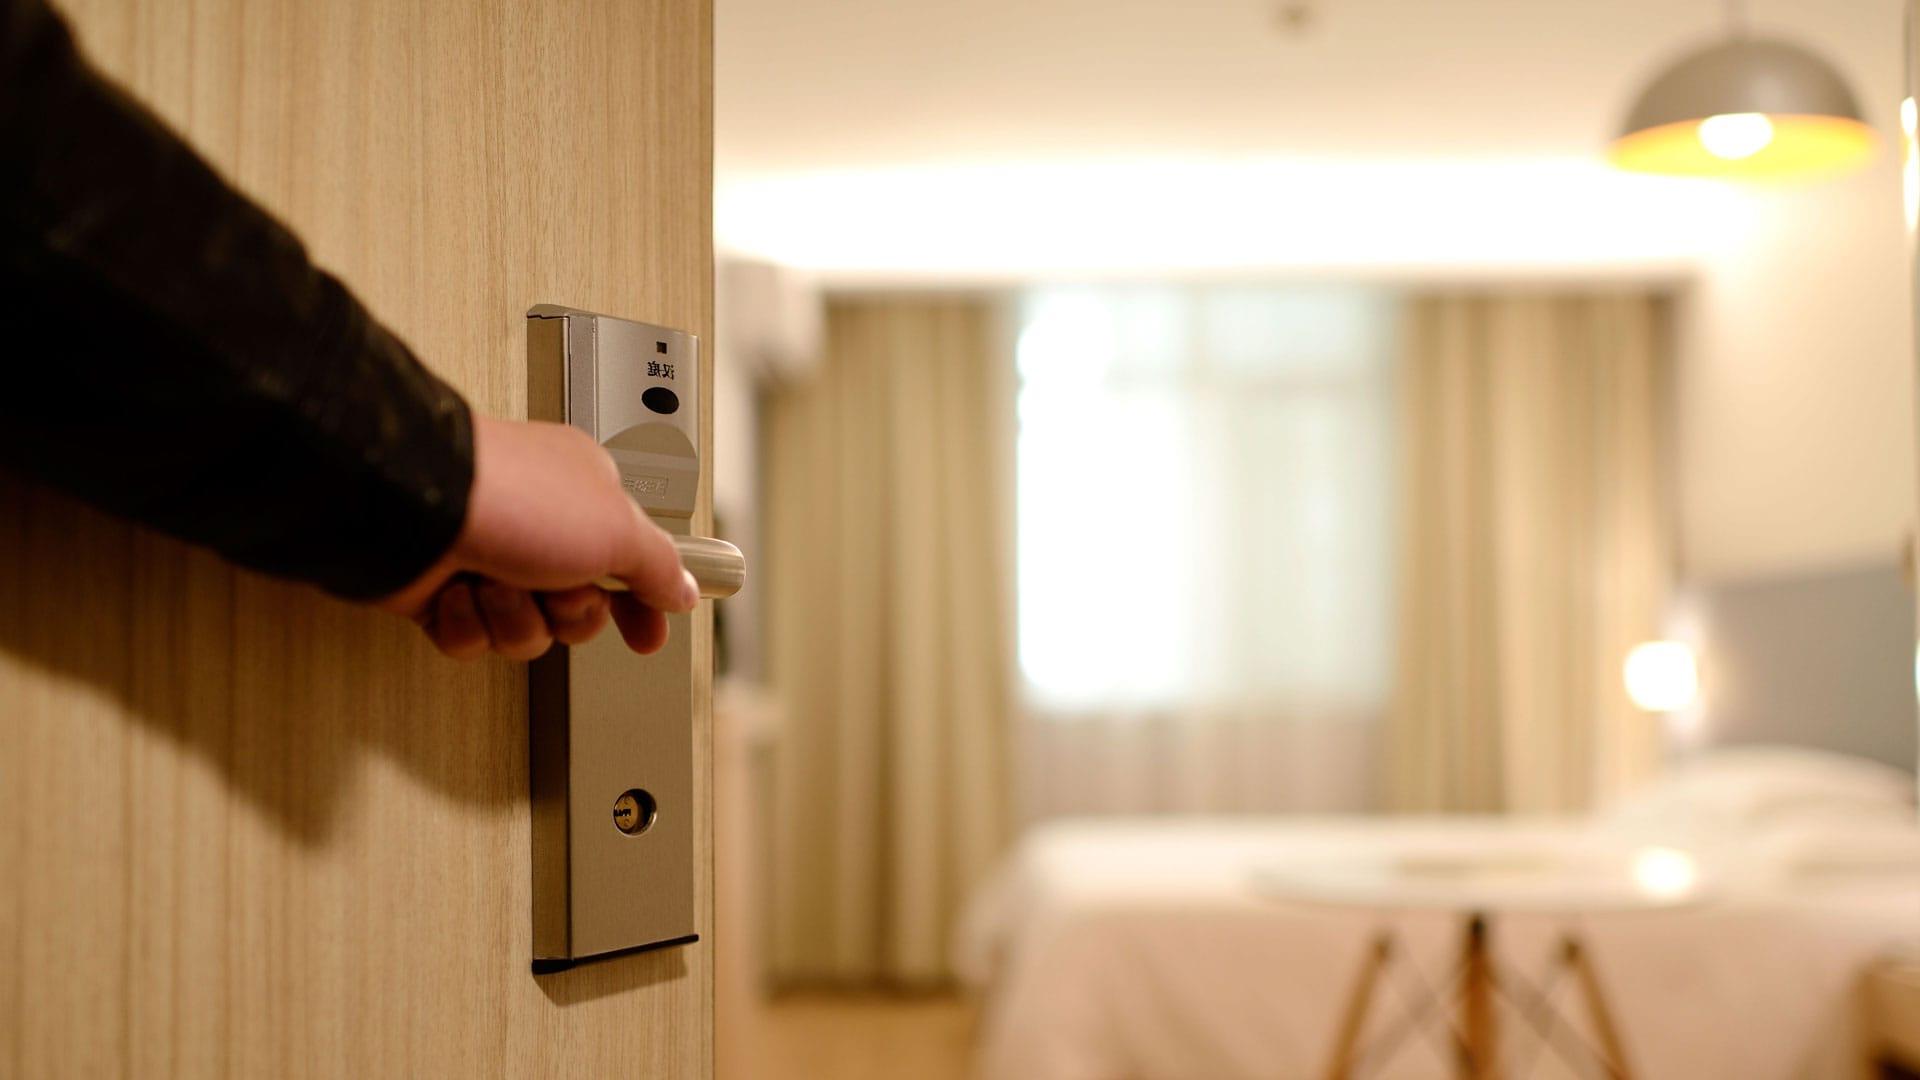 Top hotel safety tips: Your hotel room safety is important – HI Travel Tales